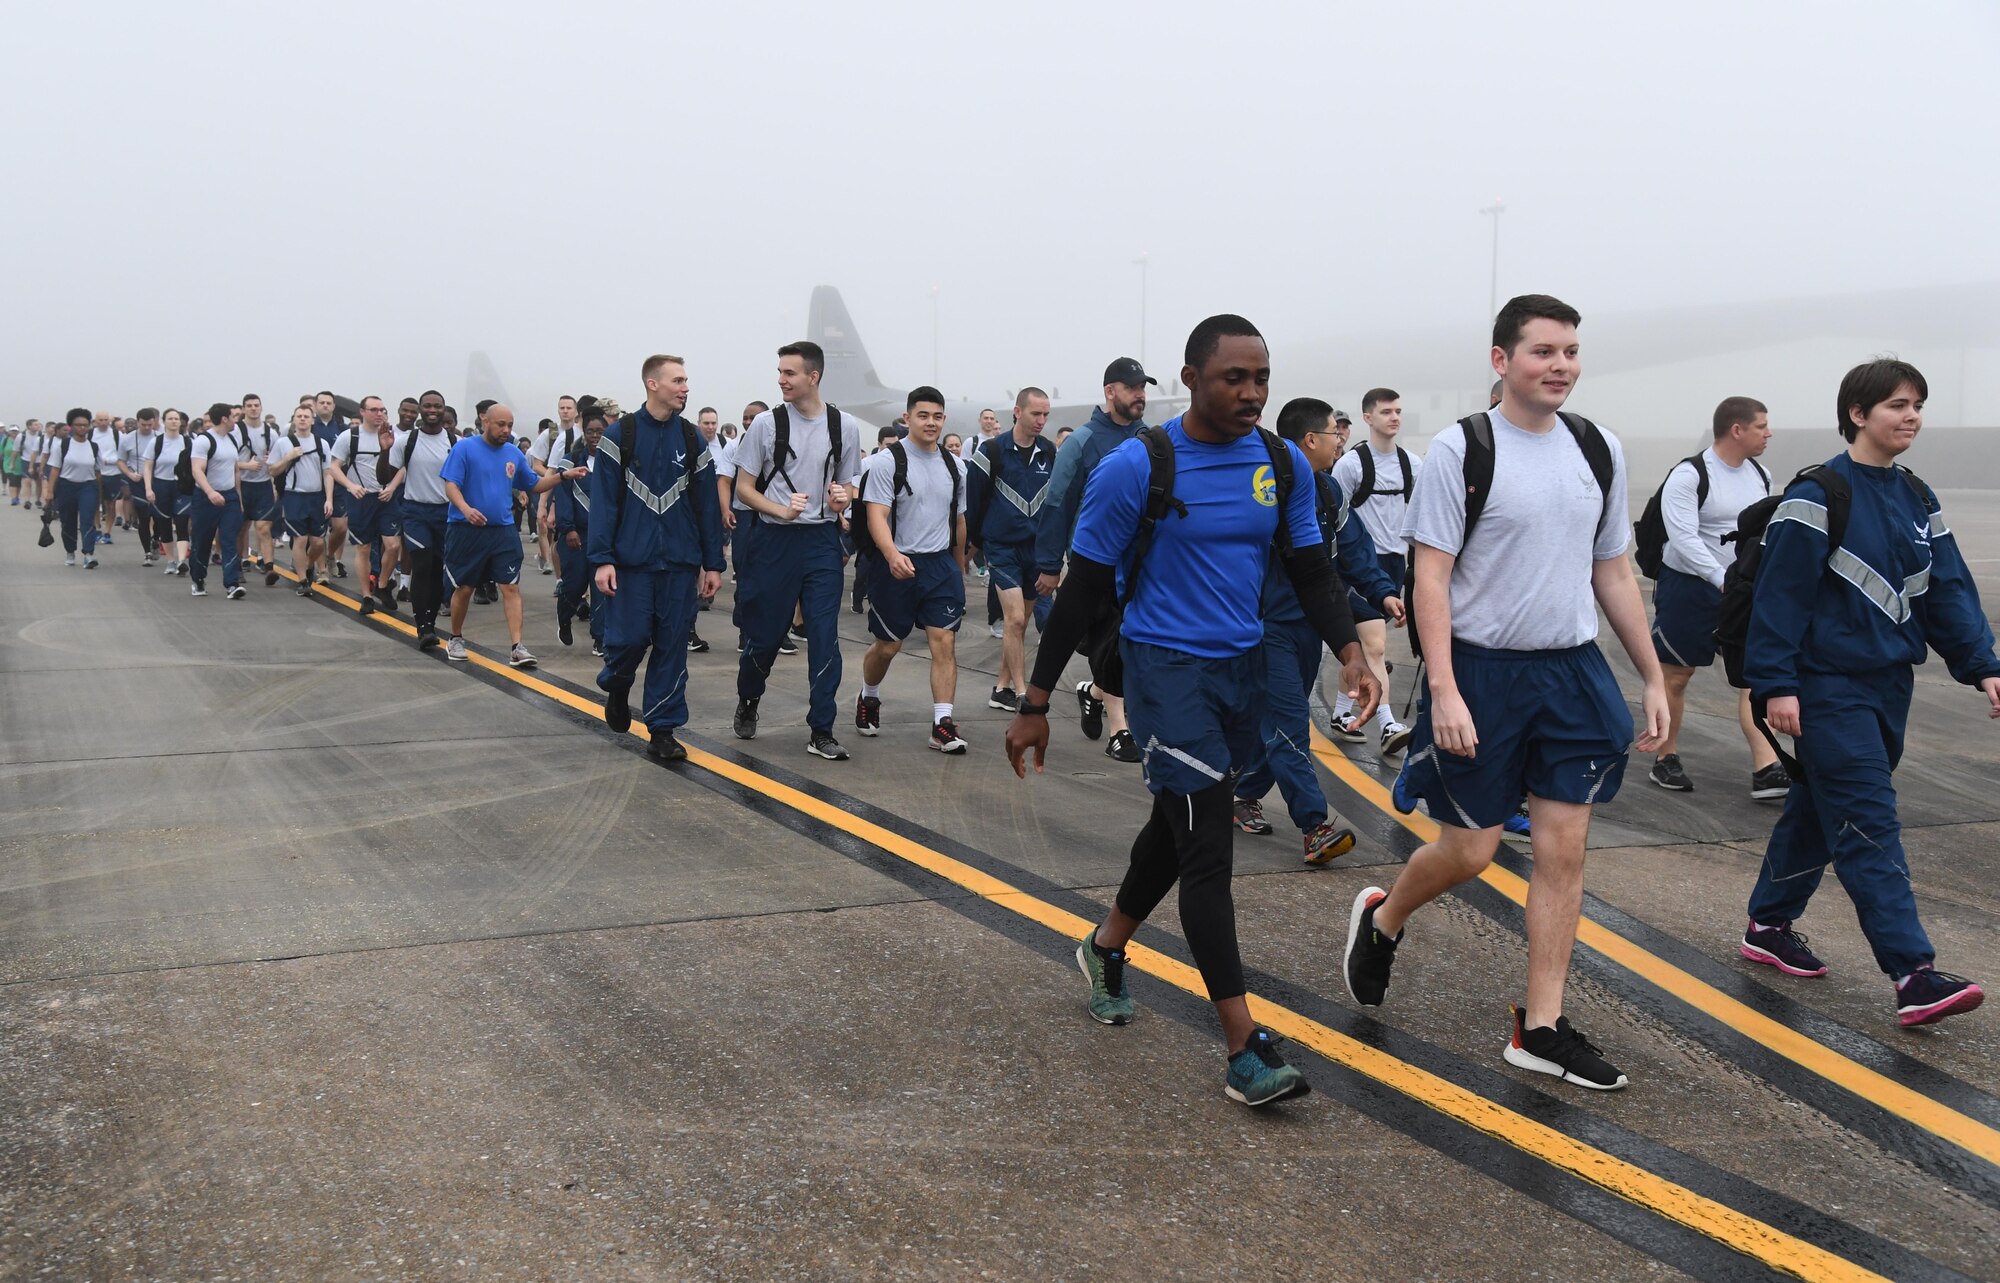 Keesler personnel participate in the Dragons March Fourth ruck march on the flightline at Keesler Air Force Base, Mississippi, March 4, 2020. Keesler personnel carried backpacks during the three-mile walk which symbolized the weight one carries through life. (U.S. Air Force photo by Kemberly Groue)